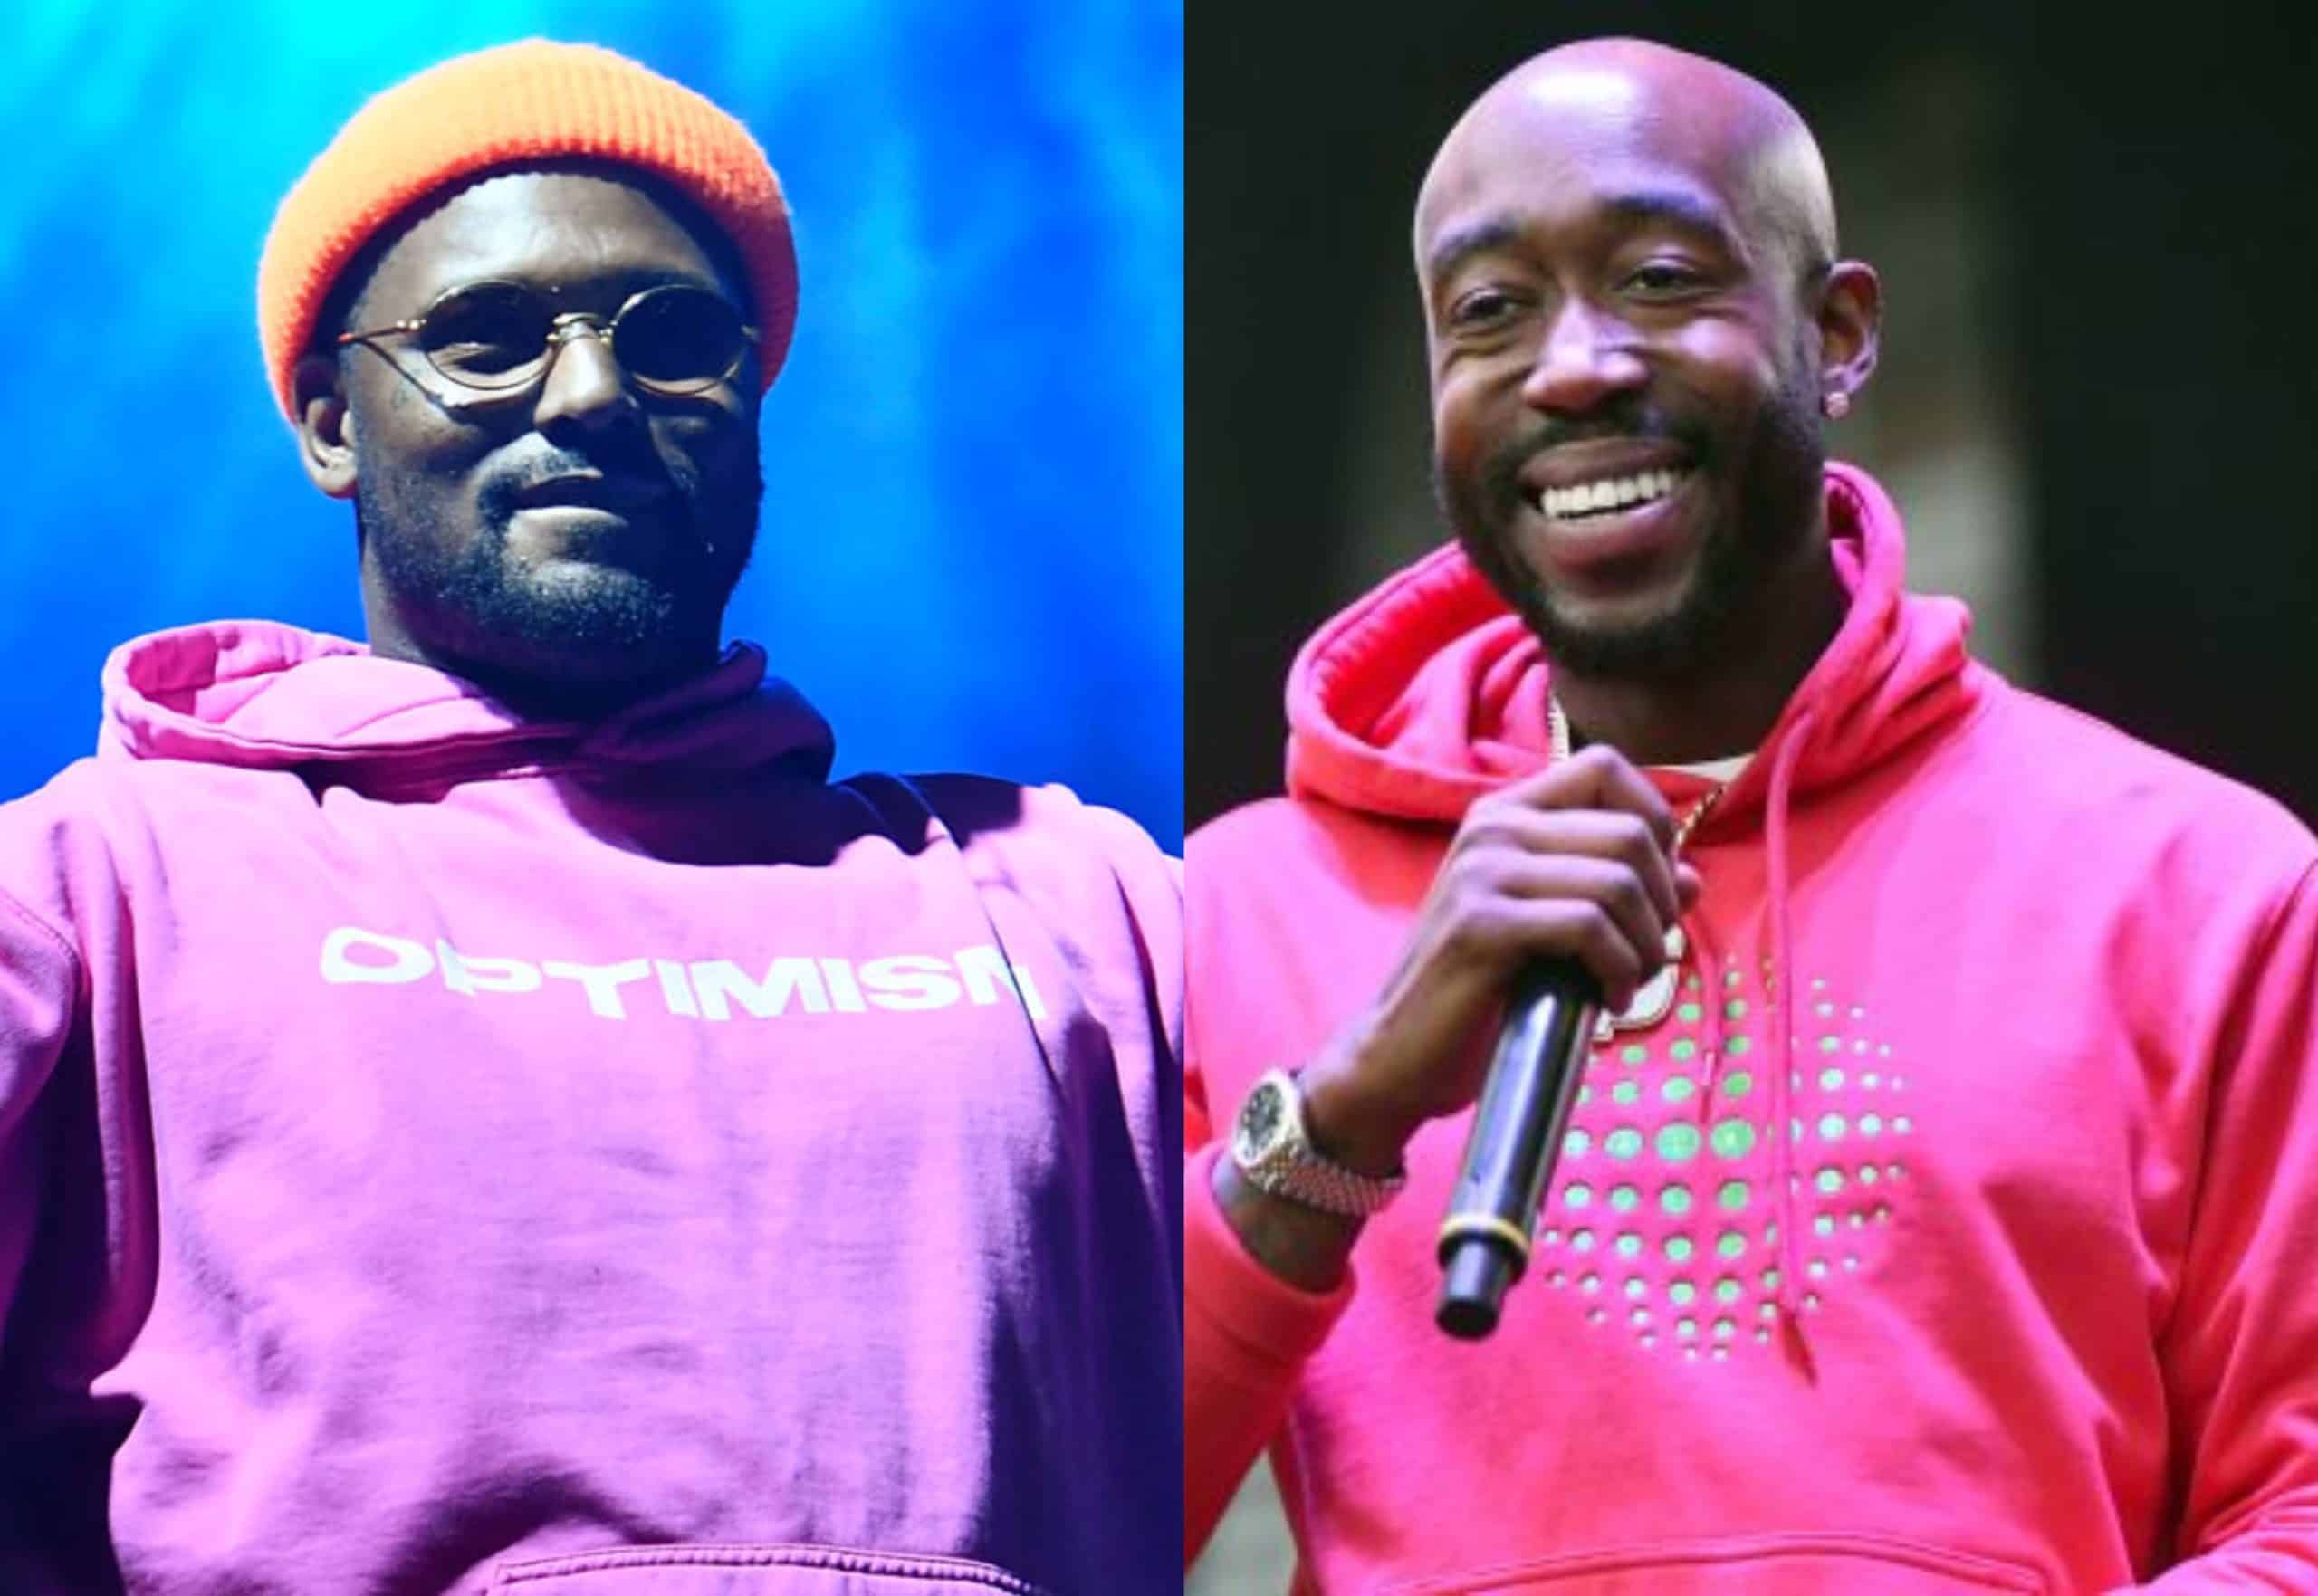 Freddie Gibbs Drops A New Song Gang Signs Feat. ScHoolboy Q